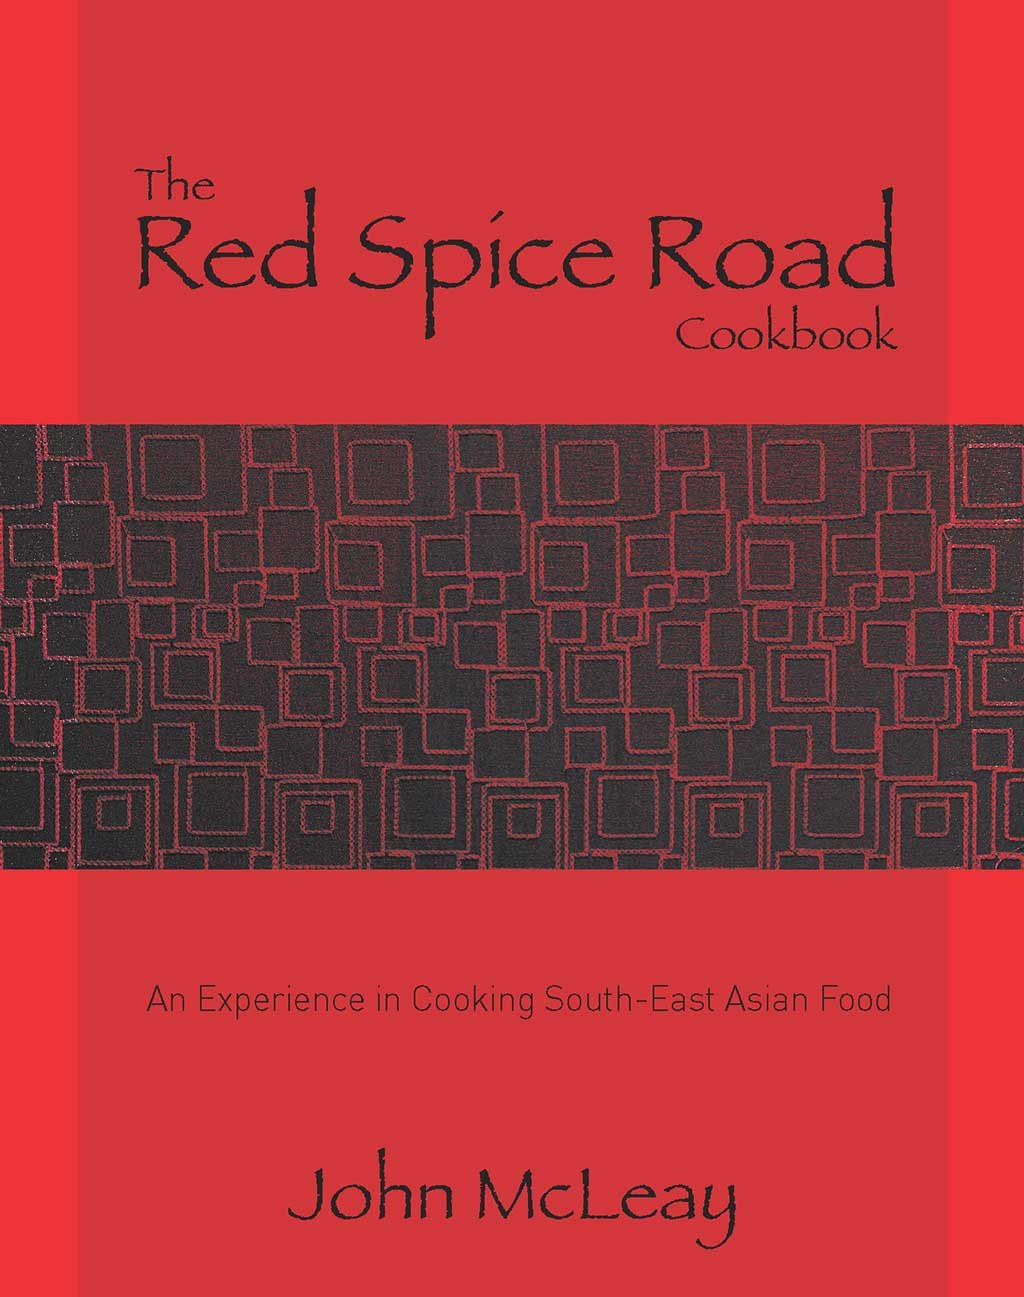 The Red Spice Road Cookbook: An Experience in Cooking South-East Asian Food (John McLeay)